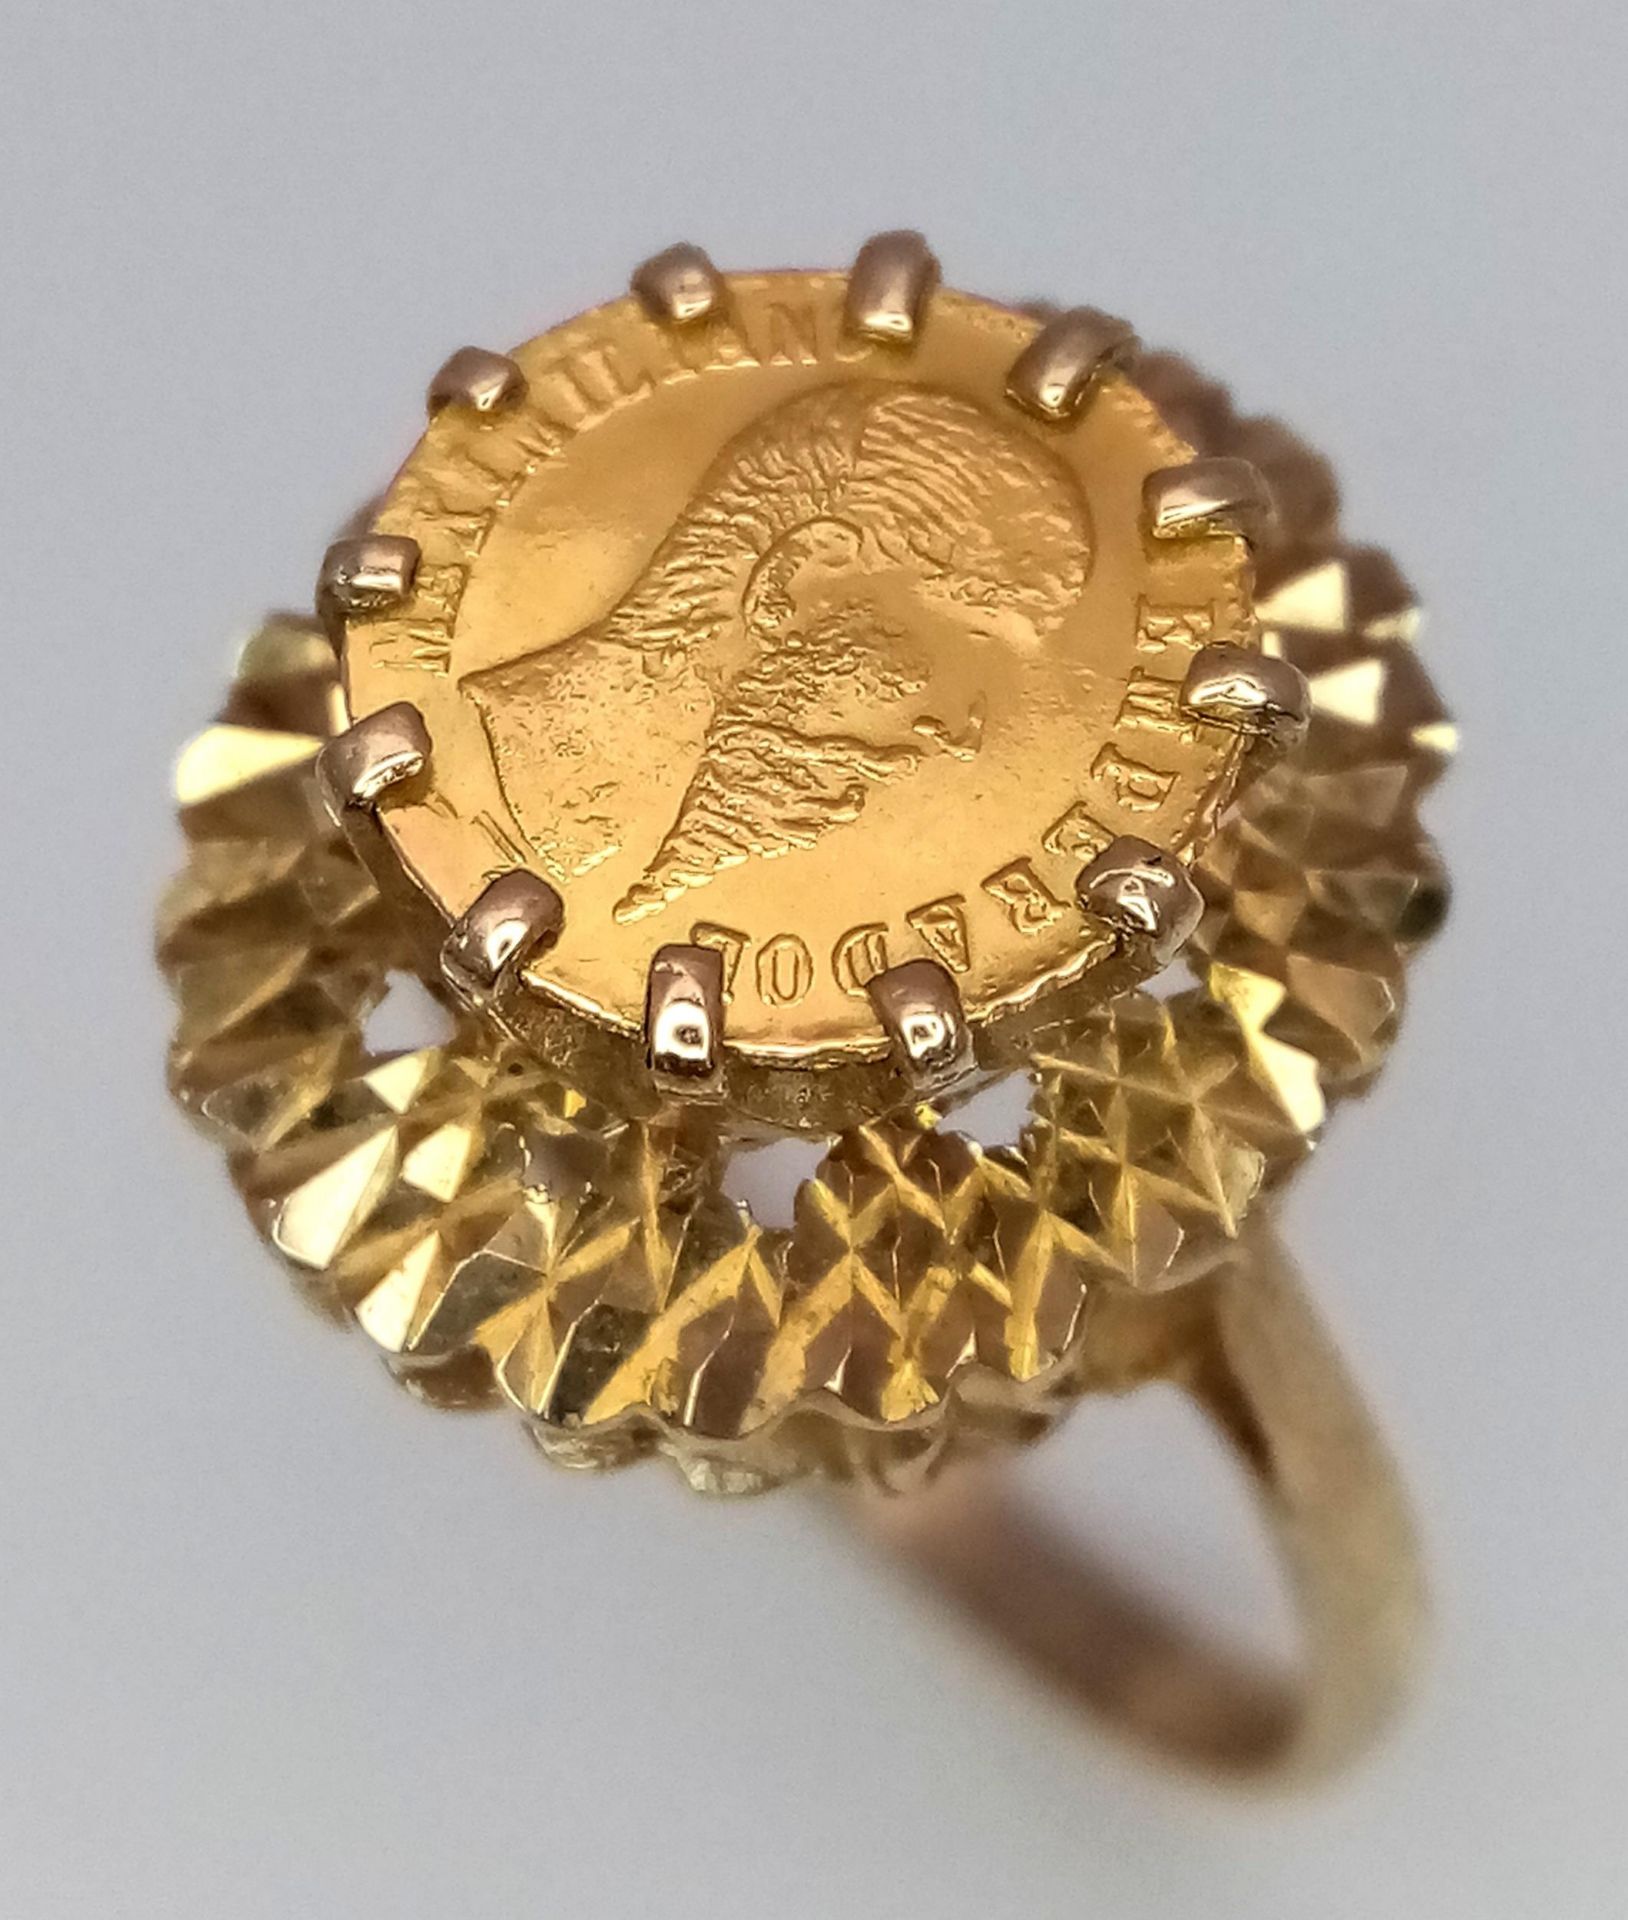 A 9 Carat Gold Tier Mounted Mexican/Columbian Gold Coin Set Ring Size P. Lower Crown Tier Measures - Image 2 of 5